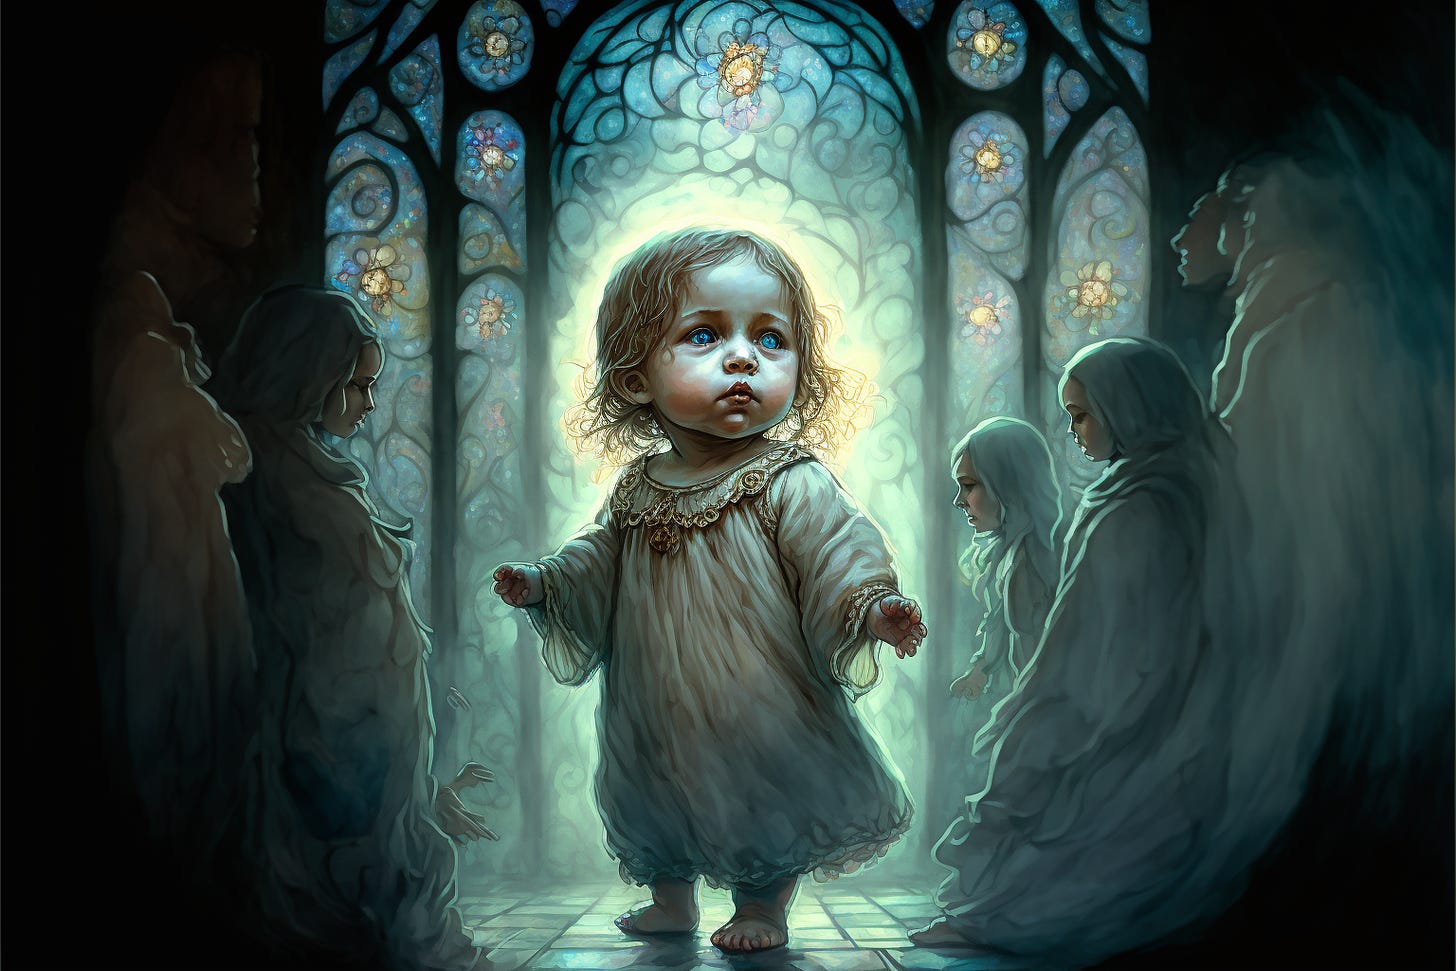 a tiny baby walking among the spirits of her ancestors, beautiful and mysterious